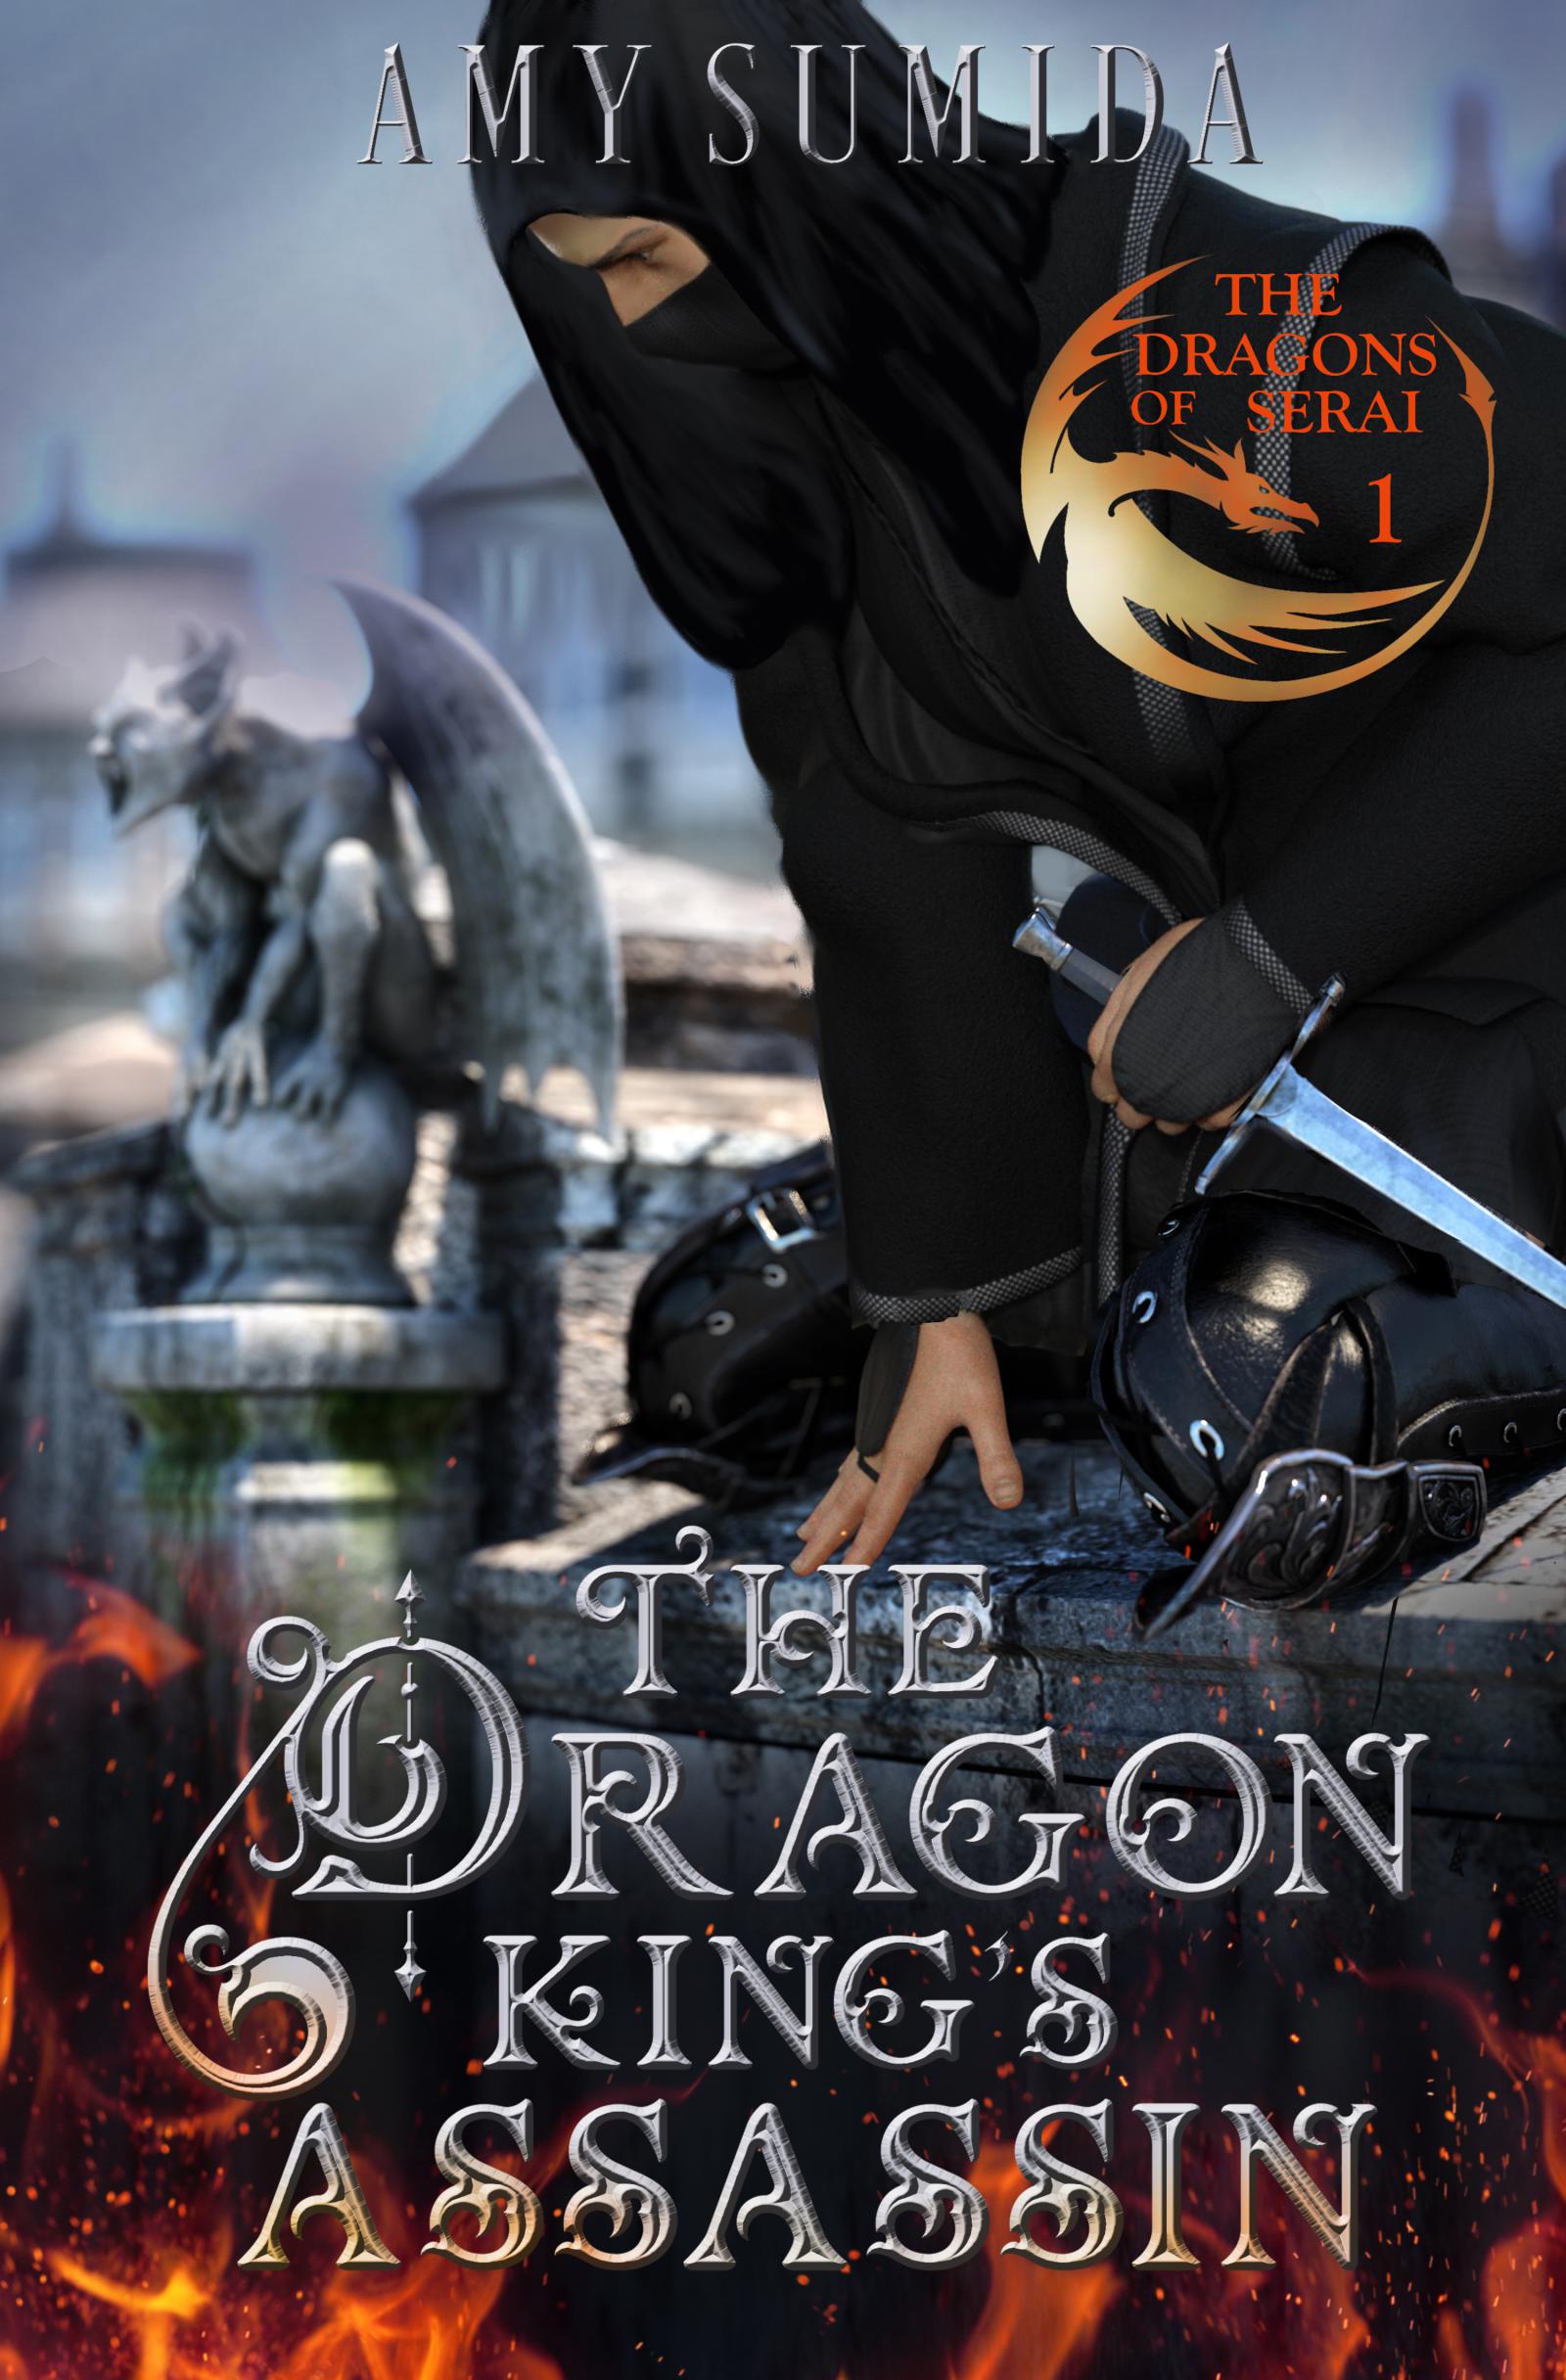 The Dragon King's Assassin - The Dragons of Serai 1 book cover